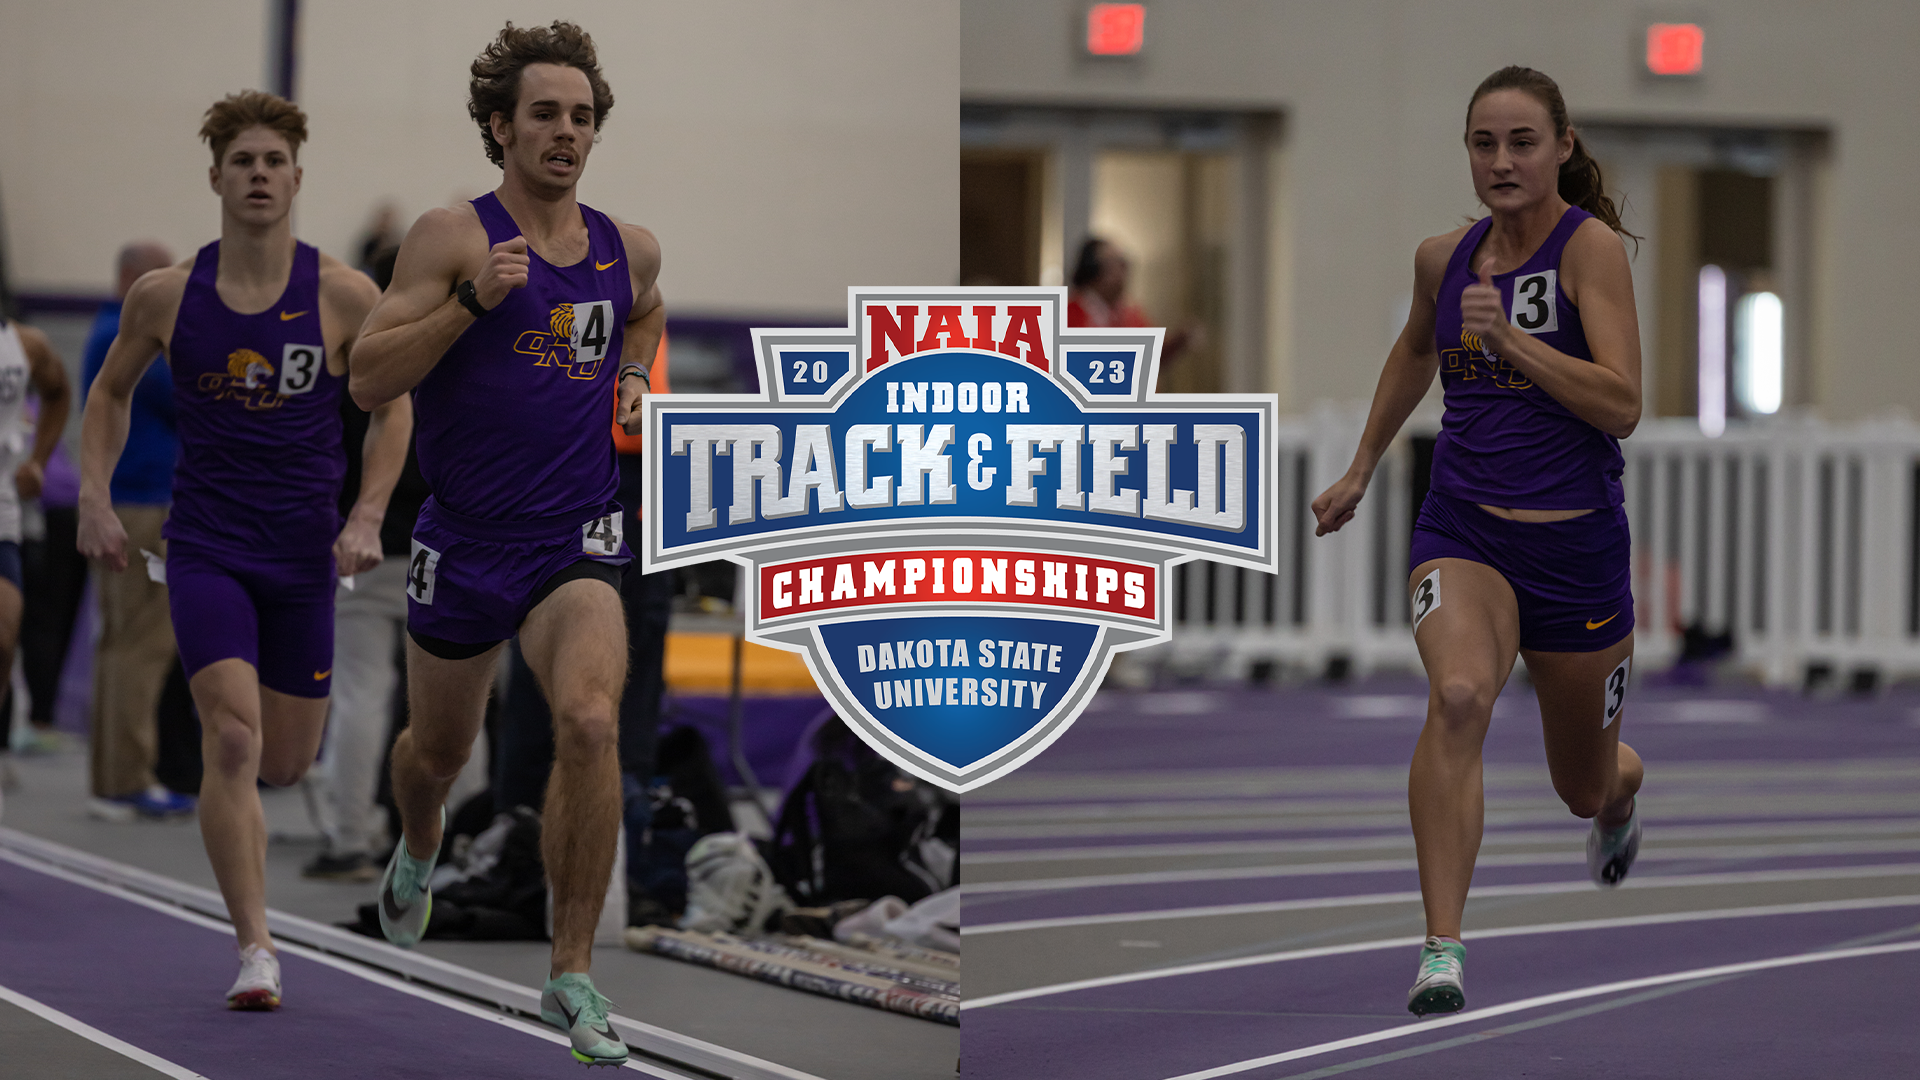 TIGERS SET FOR THE NAIA INDOOR TRACK & FIELD CHAMPIONSHIPS